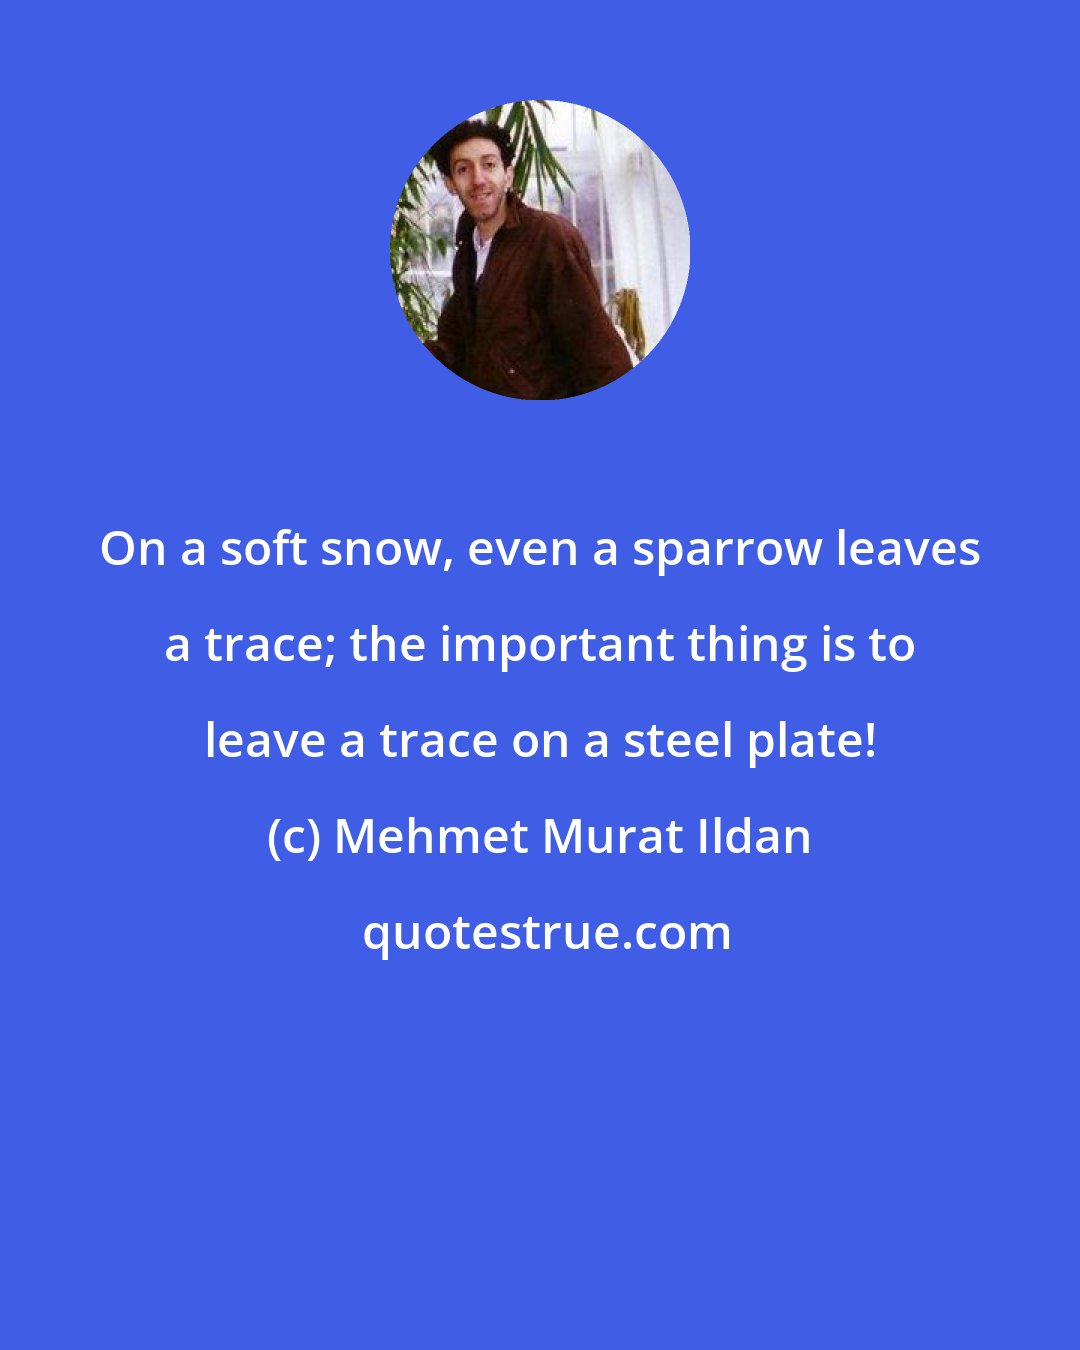 Mehmet Murat Ildan: On a soft snow, even a sparrow leaves a trace; the important thing is to leave a trace on a steel plate!